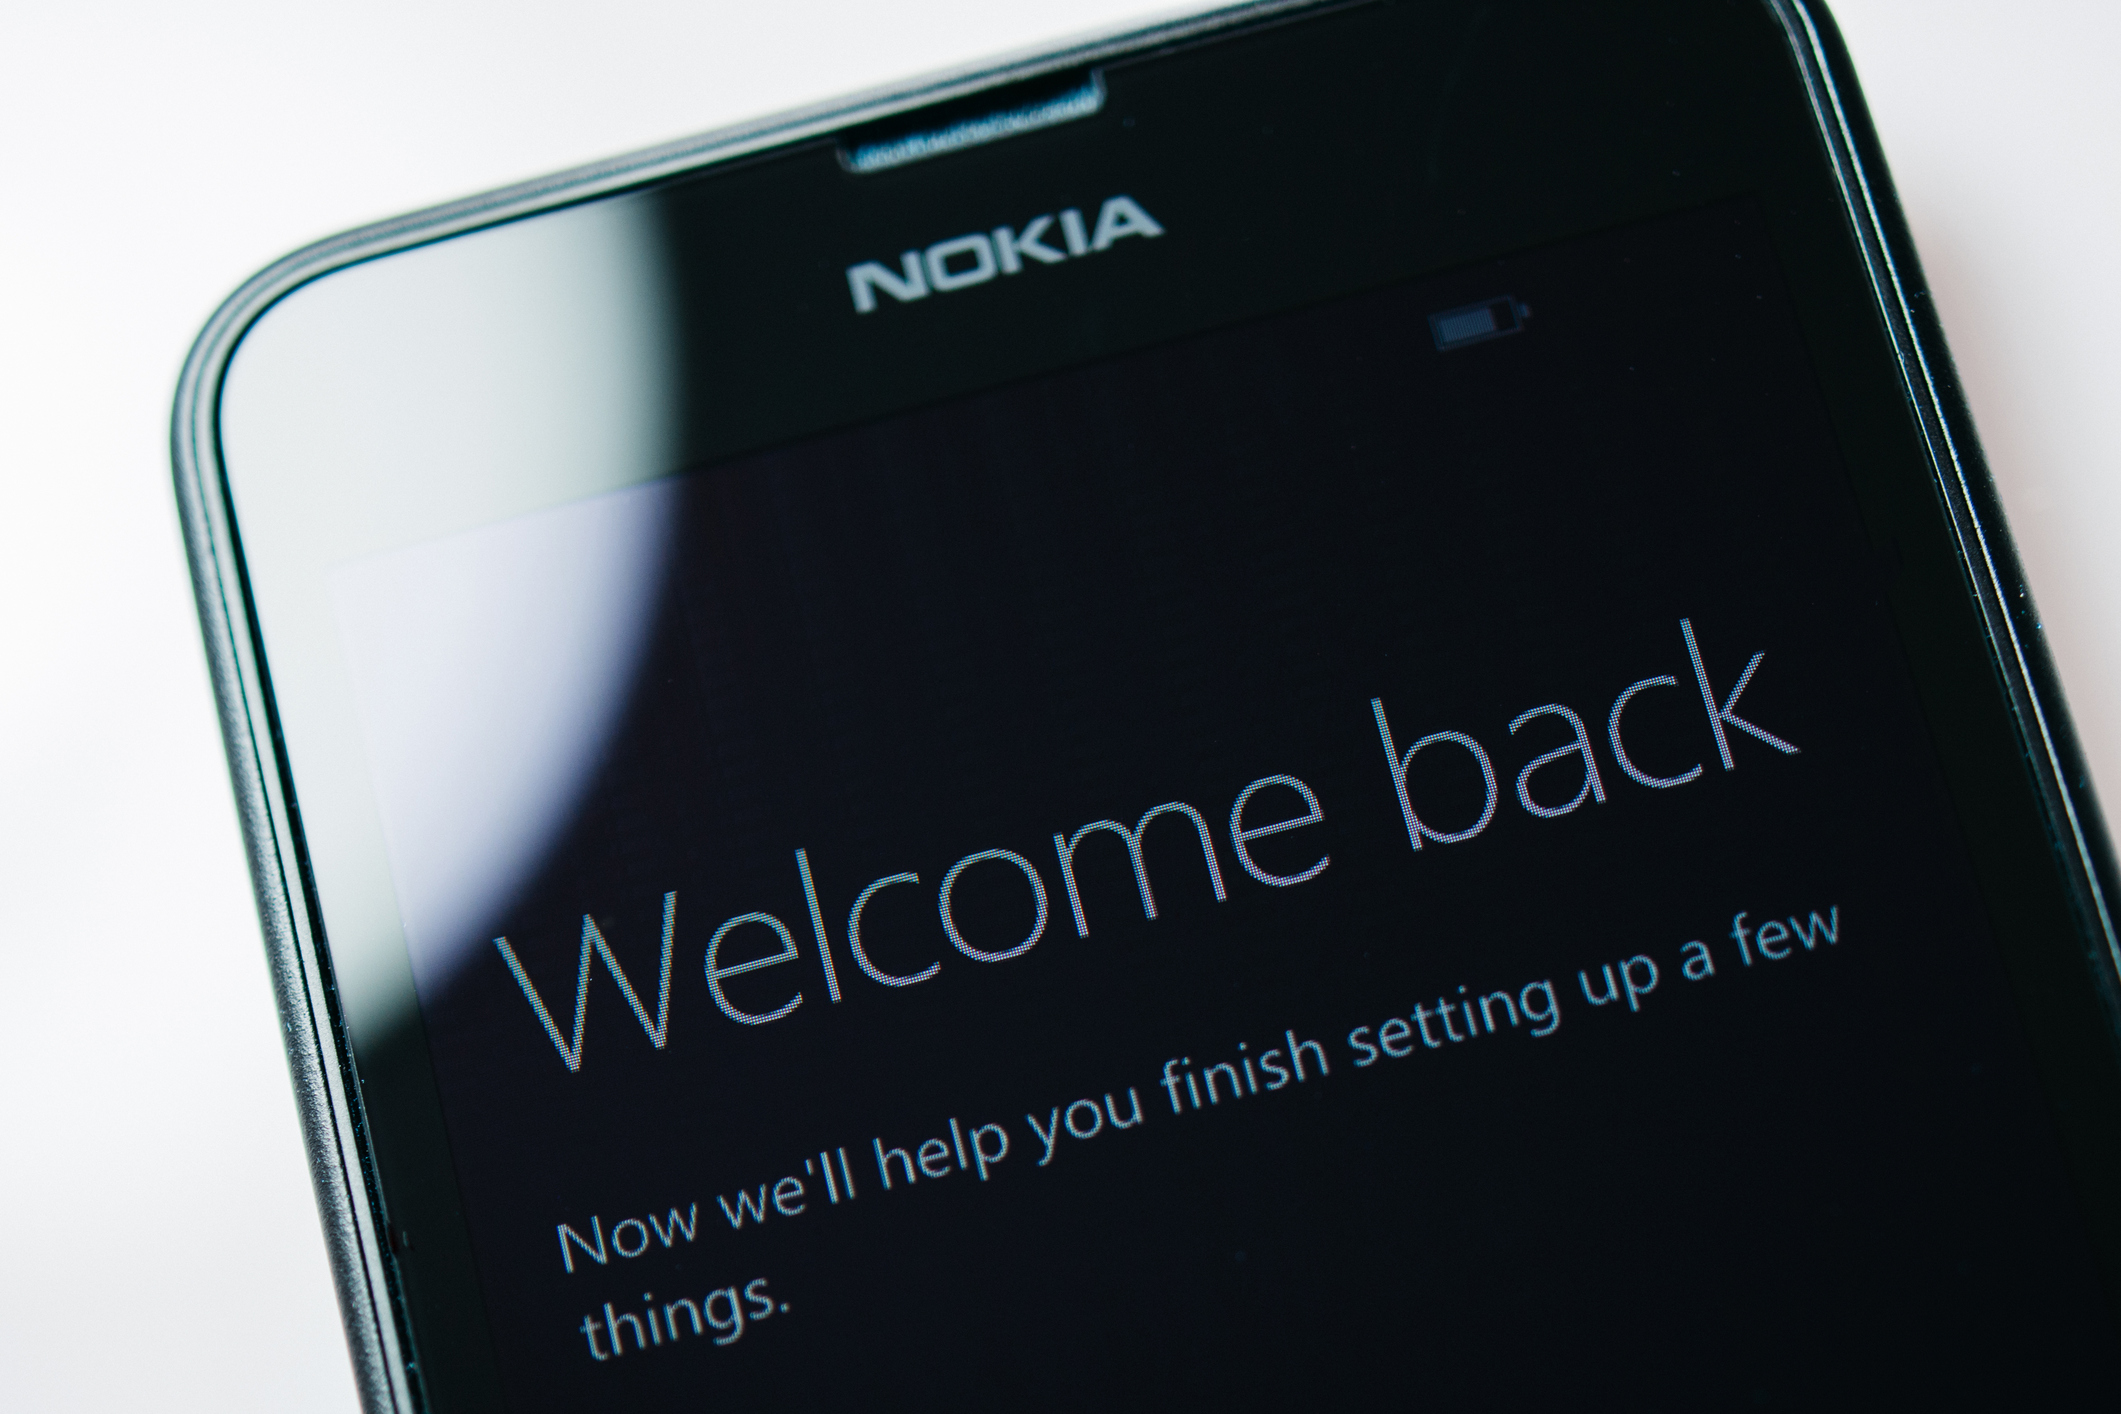 Nokia S Smartphone Future Shapes Up New Website Android Phone Due First Half 2017 Zdnet